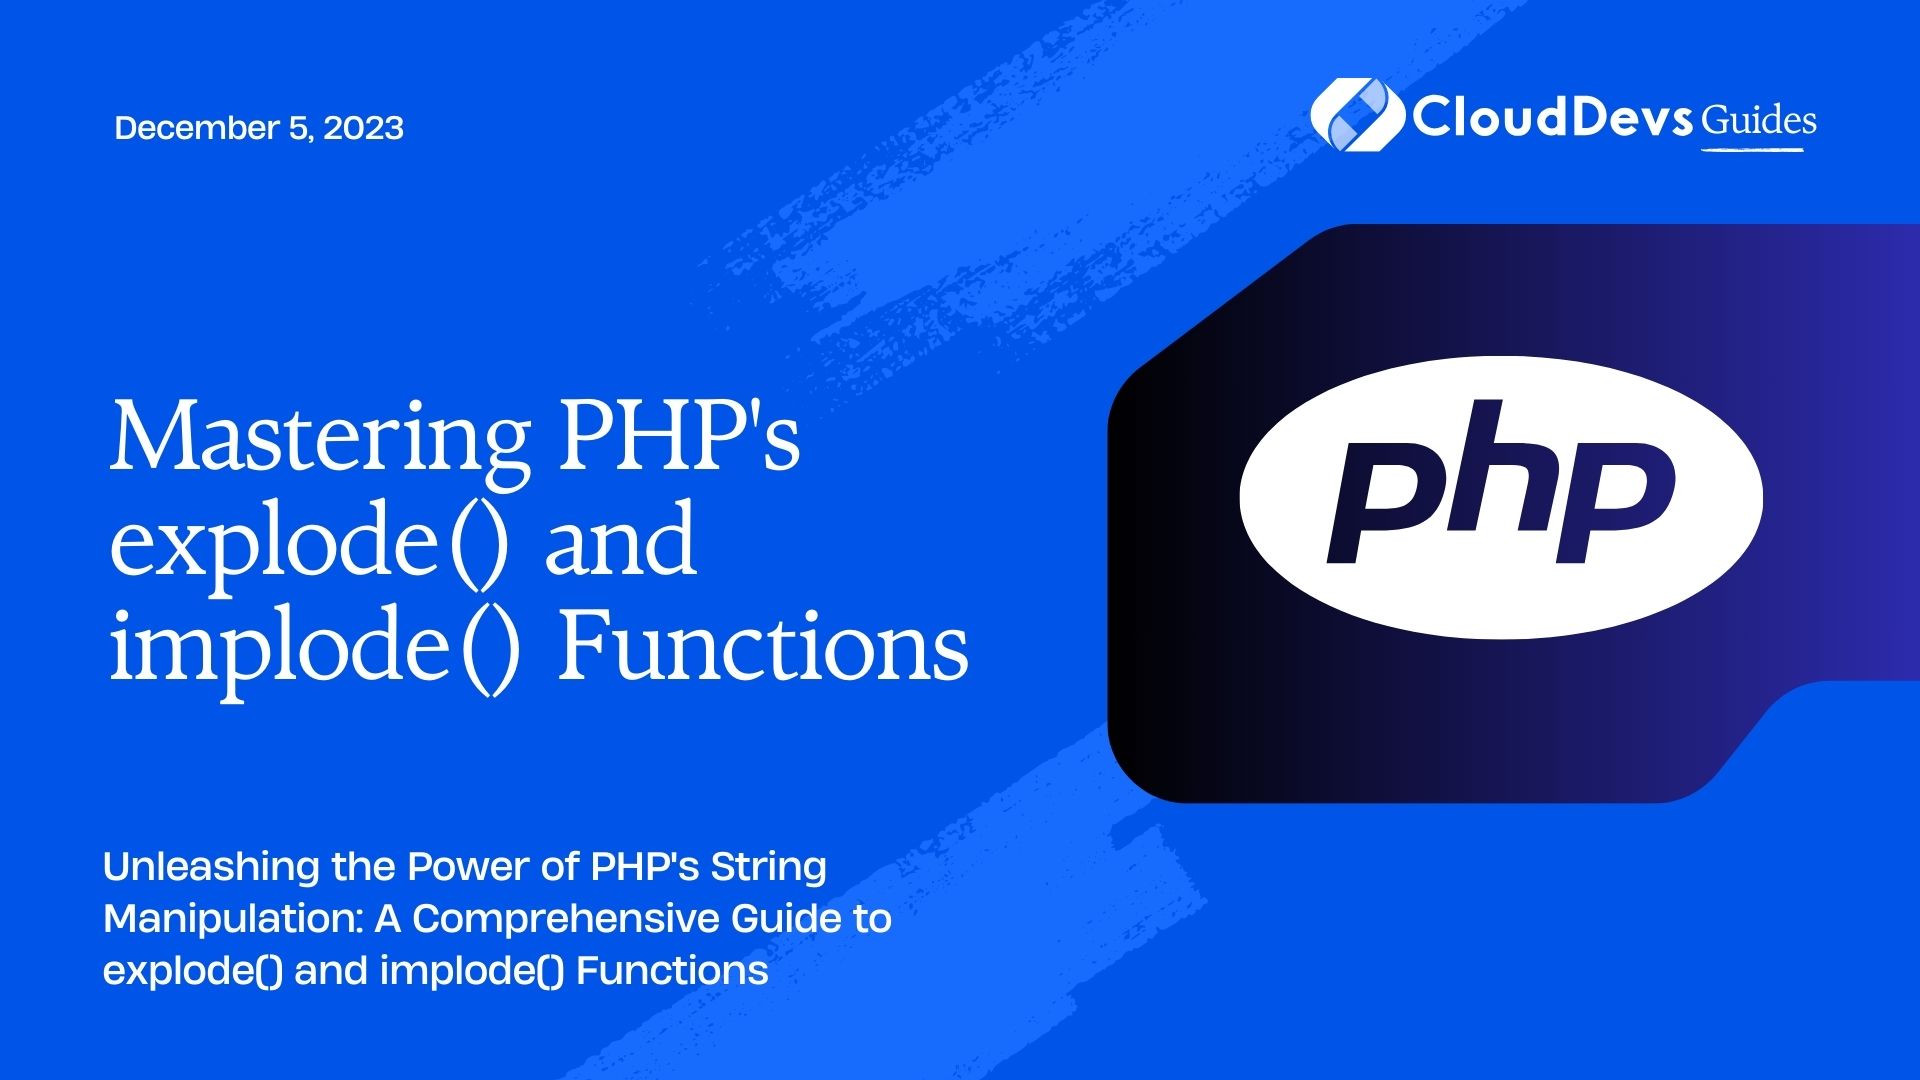 Mastering PHP's explode() and implode() Functions